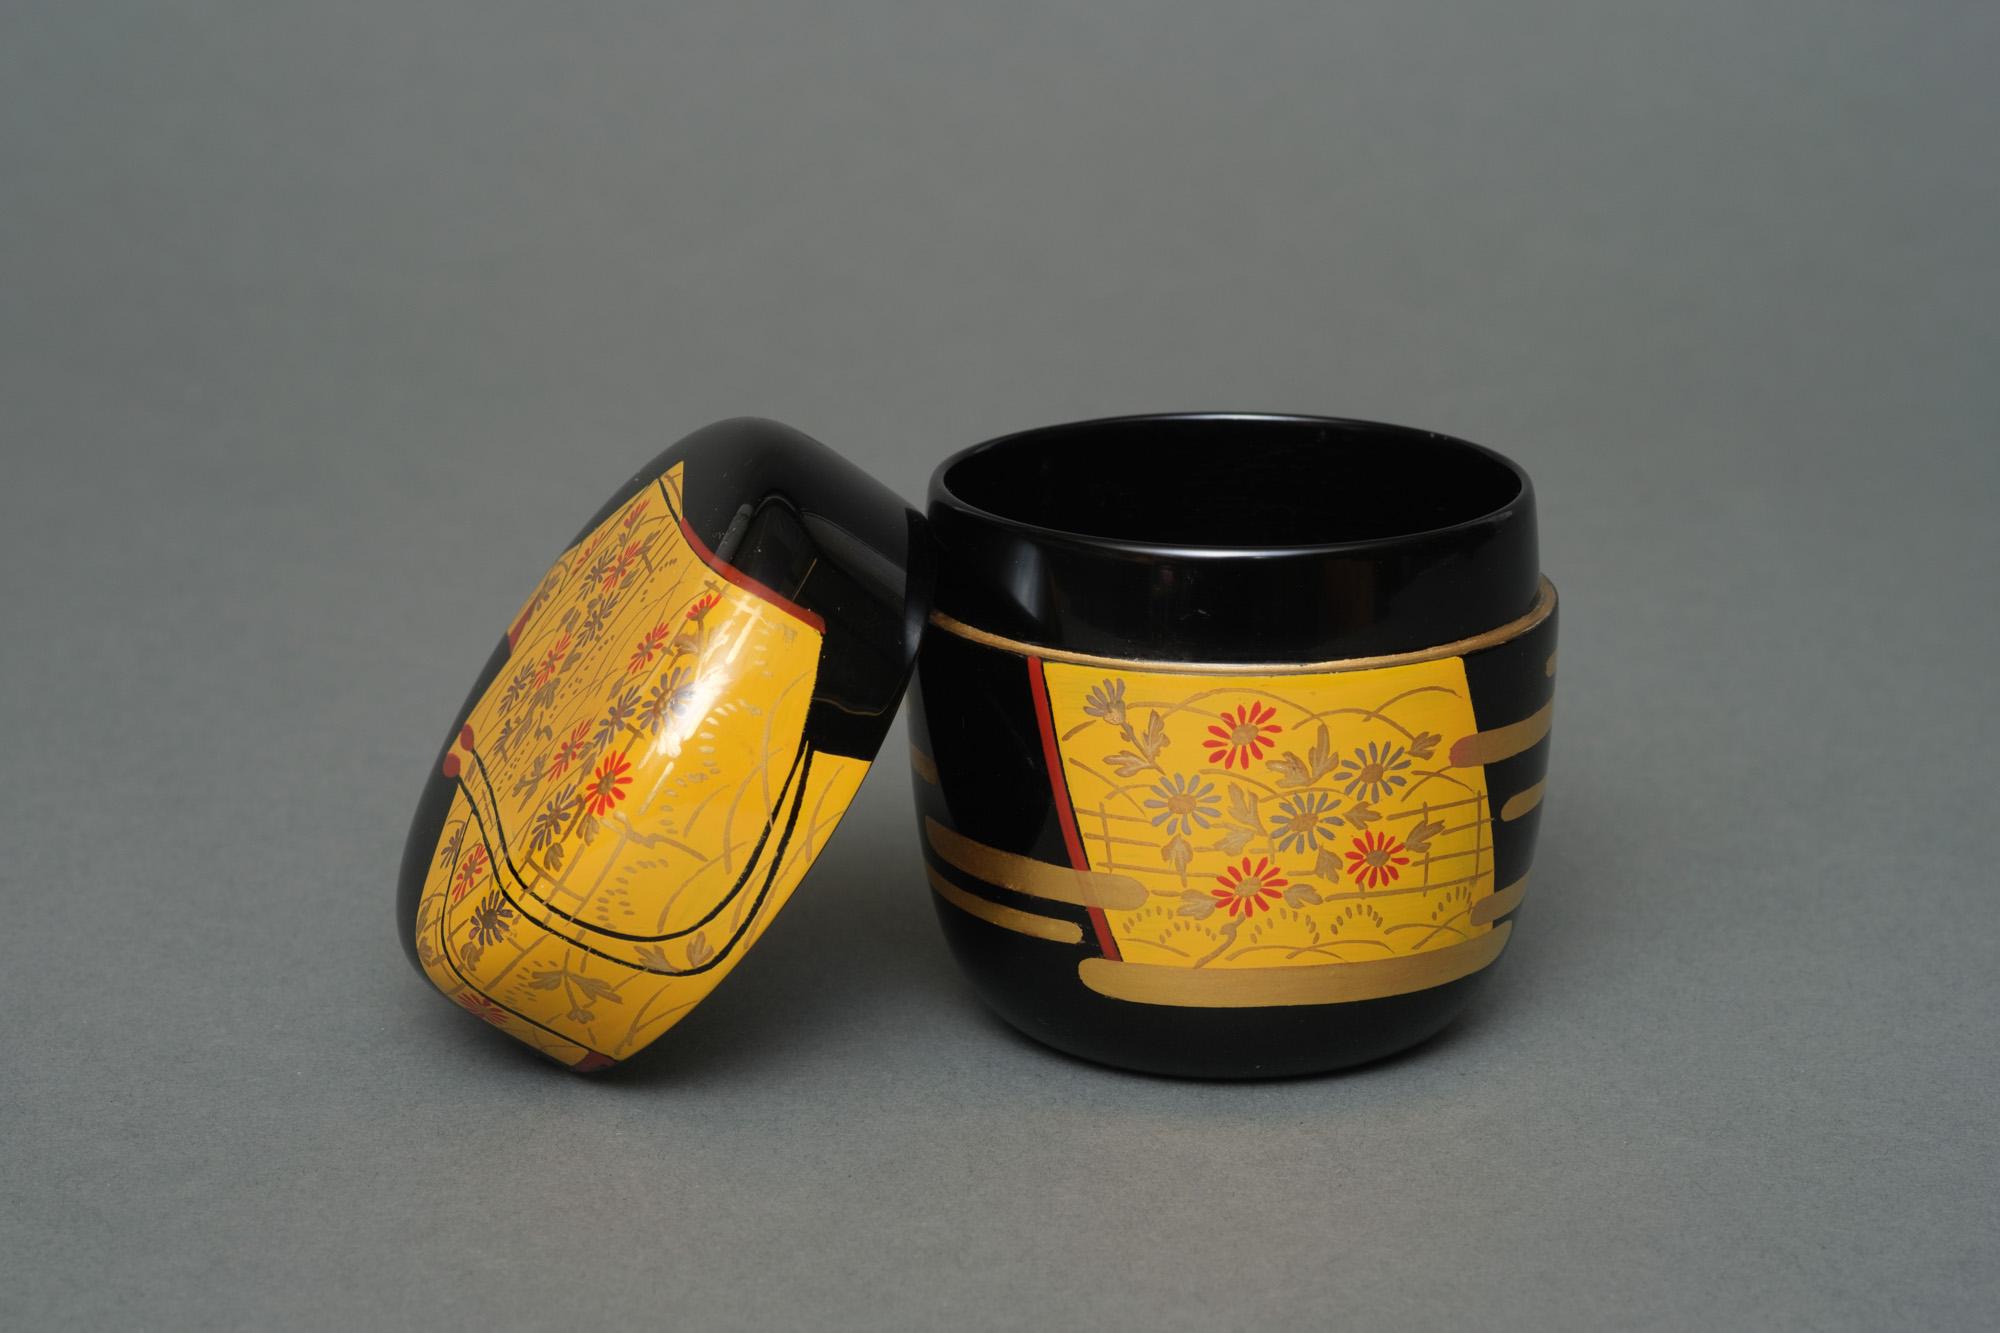 Nice black lacquer tea caddy (natsume) with a colourful hiramaki-e (low-relief design) of a folded yellow kimono with a silver and red chrysanthemum flower pattern. The base with a few golden stylized ‘fog’ streaks.
The interior finished with shiny